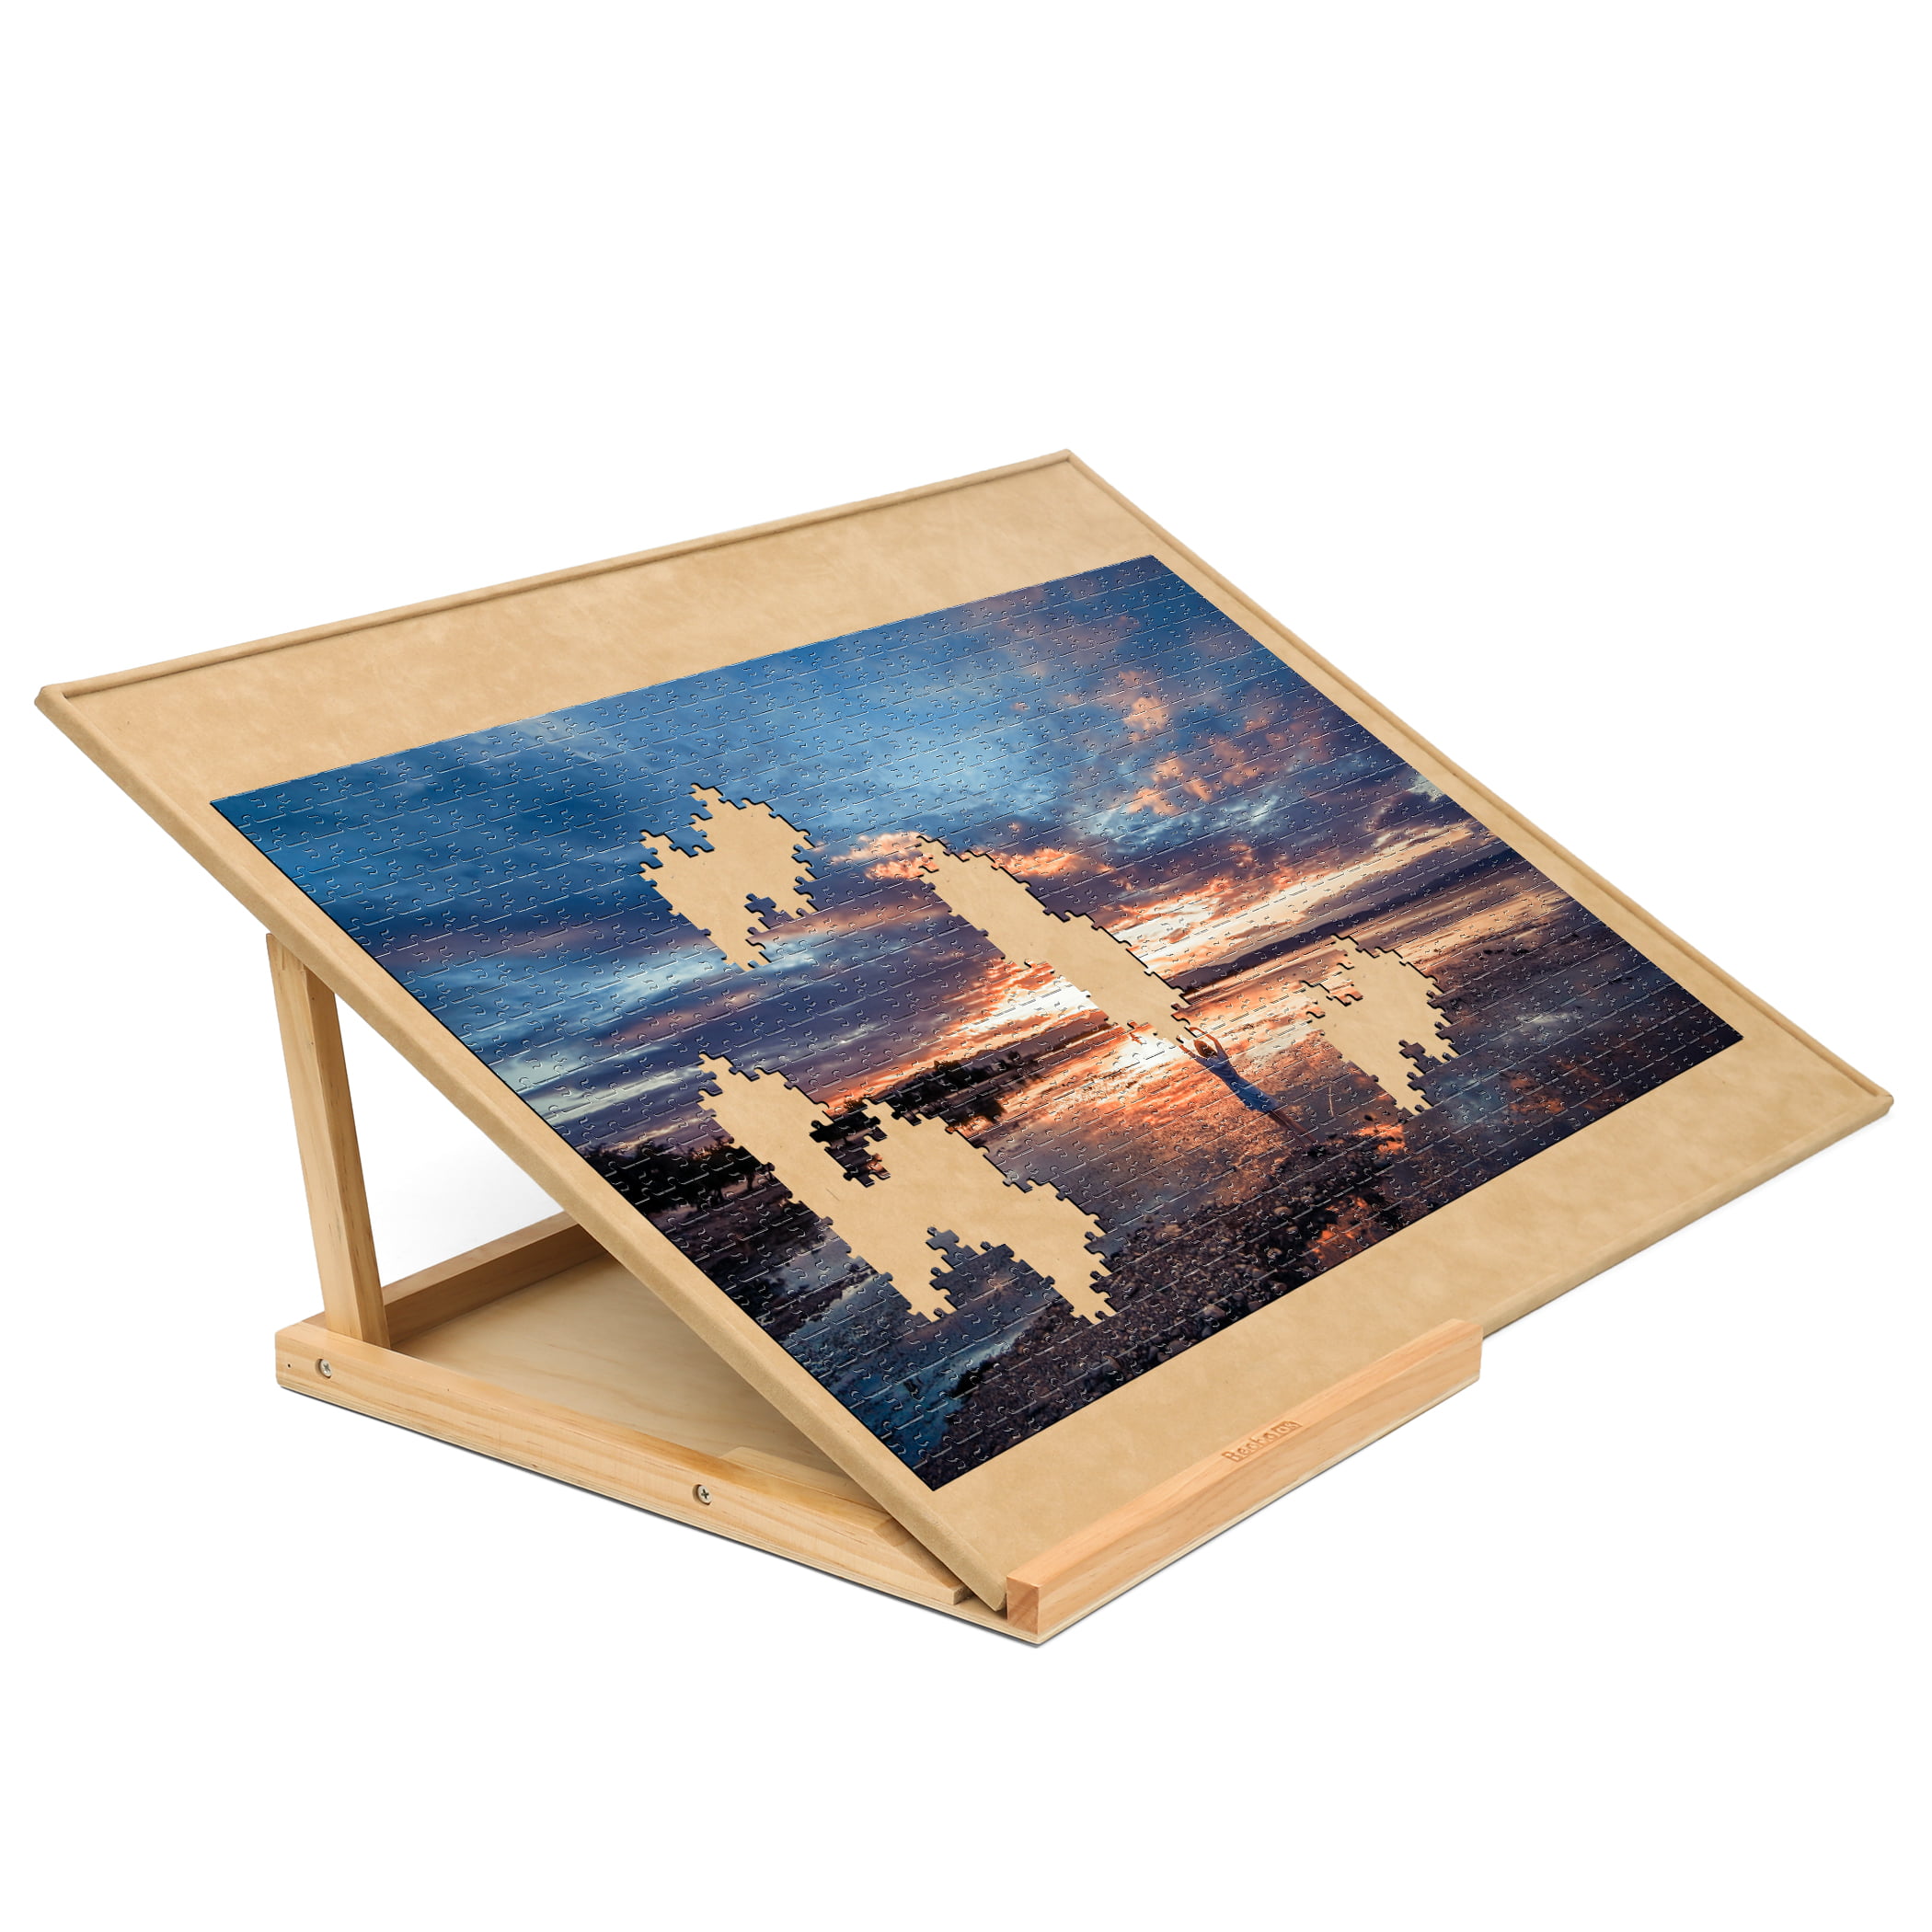 Becko Puzzle Board & Bracket Set/Wooden Puzzle Board Kit/Jigsaw Puzzle